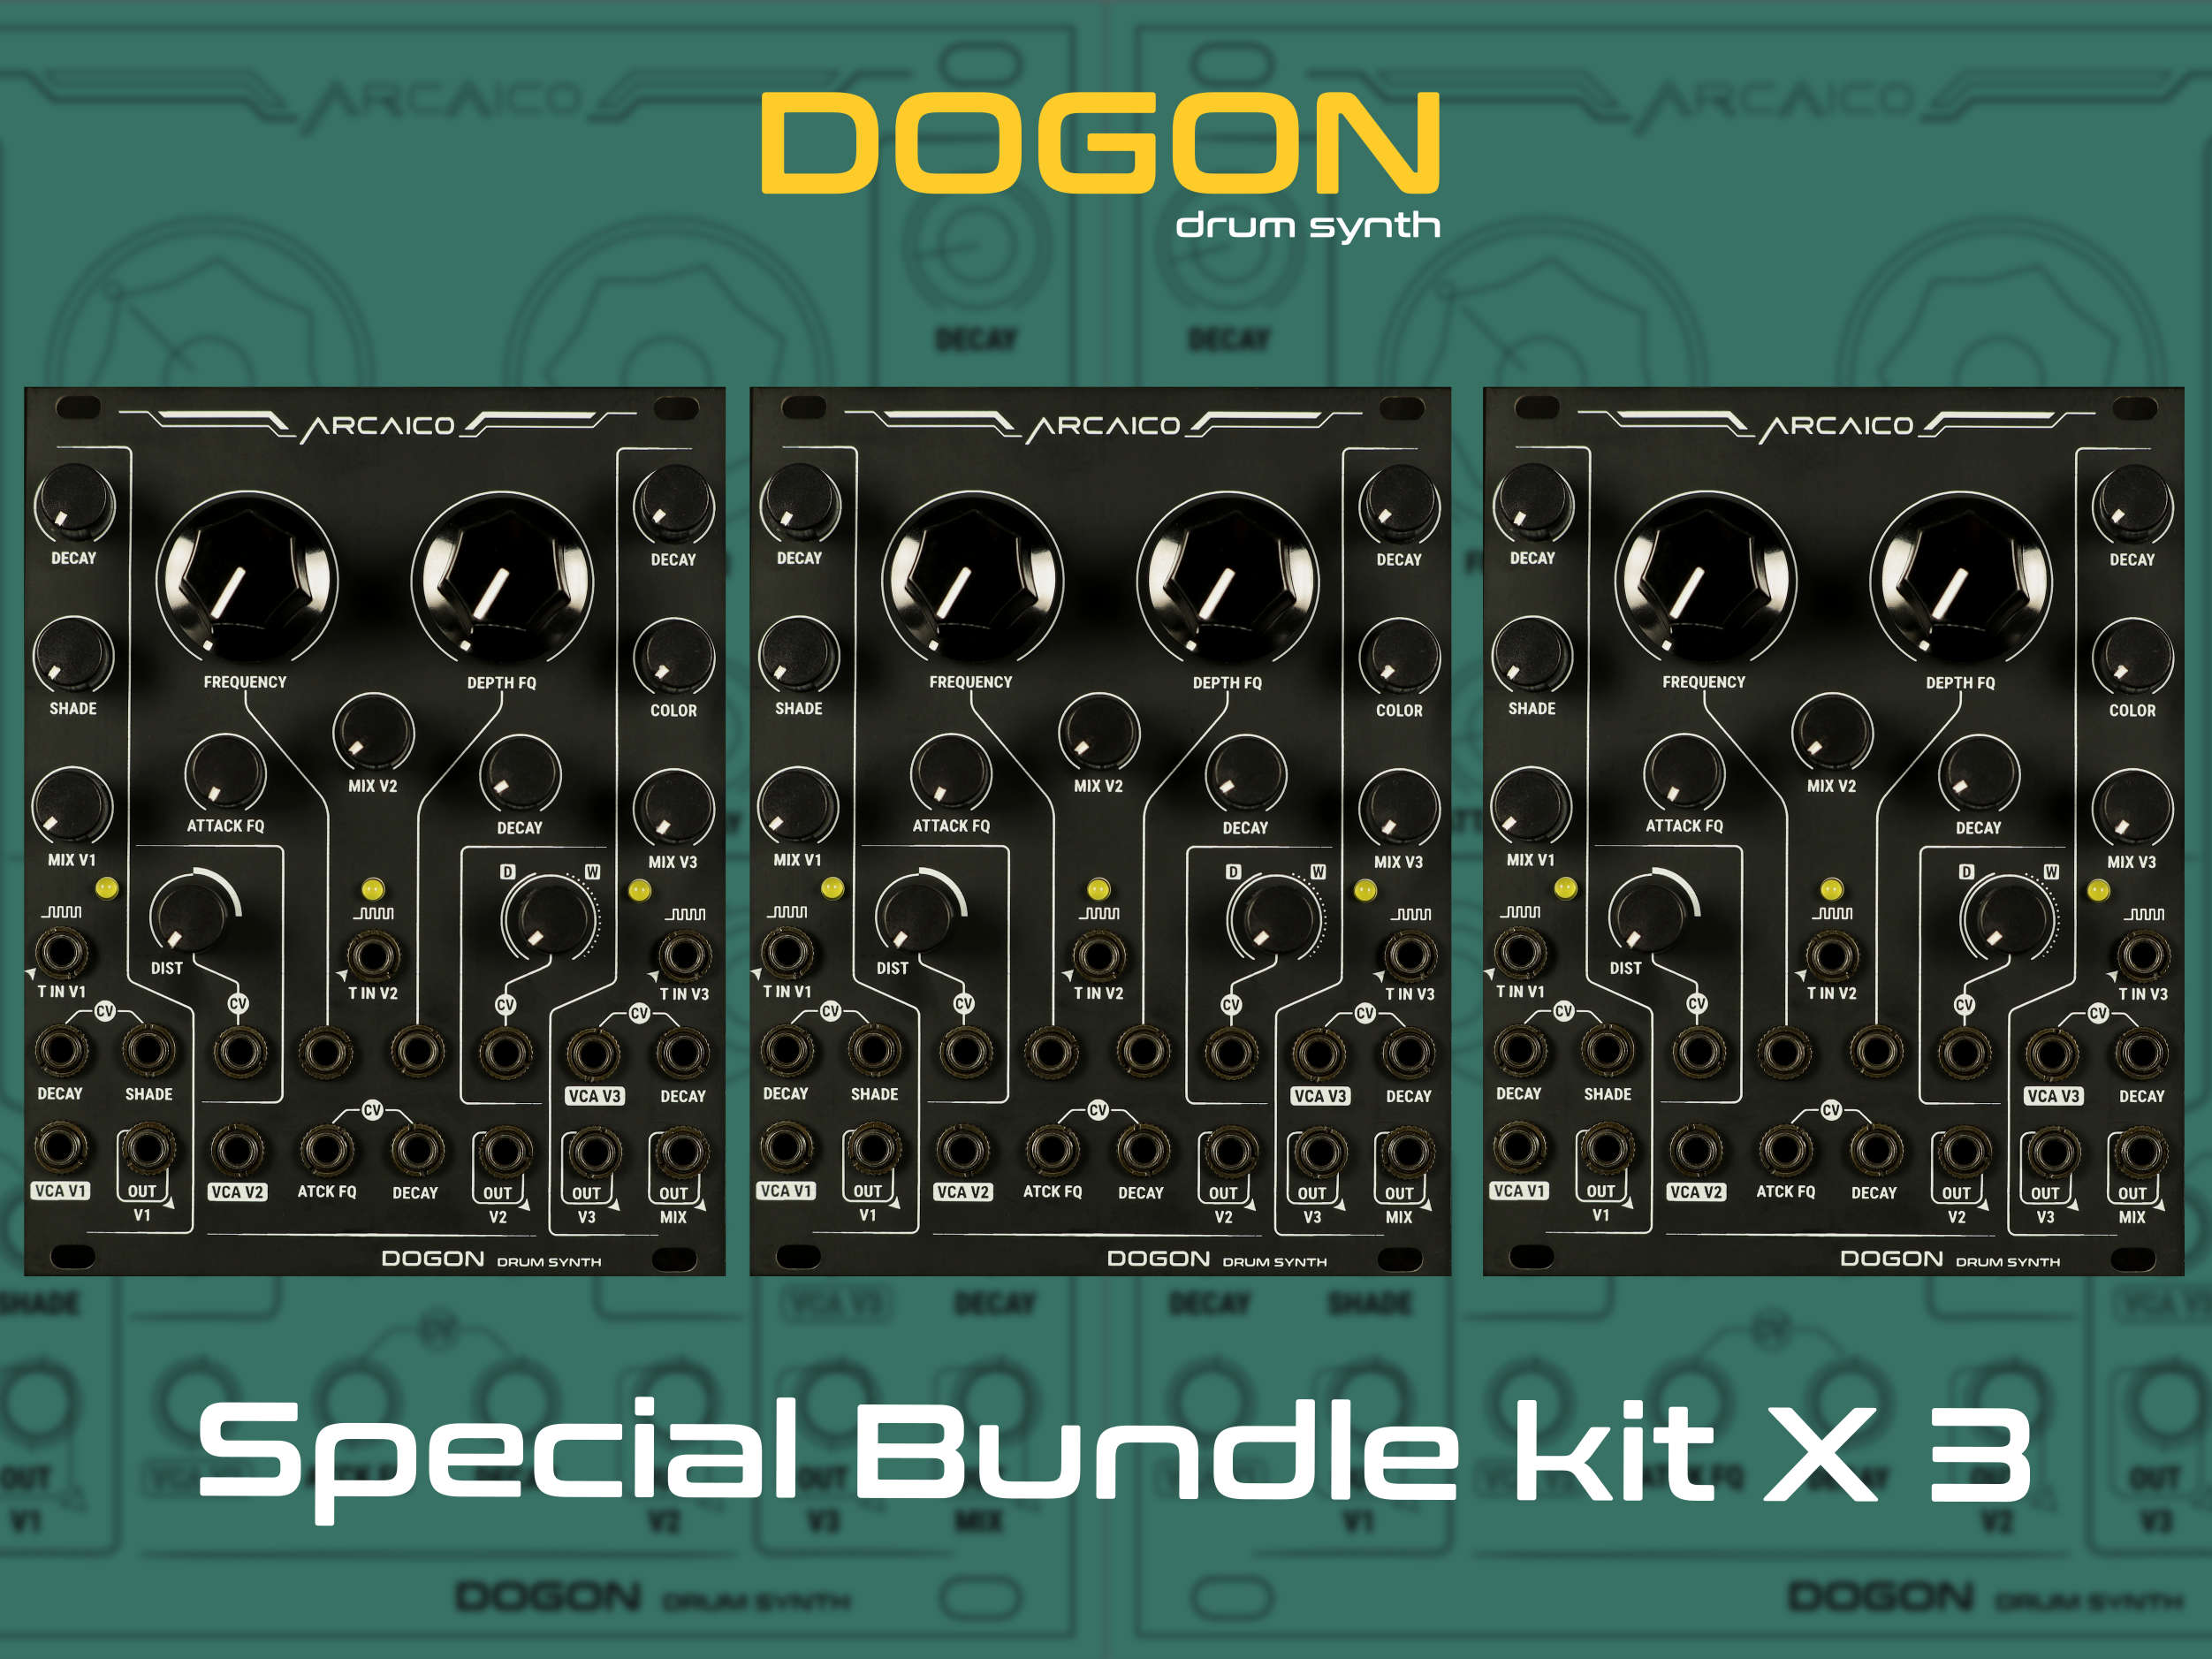 Dogon drum synth special bundle x3